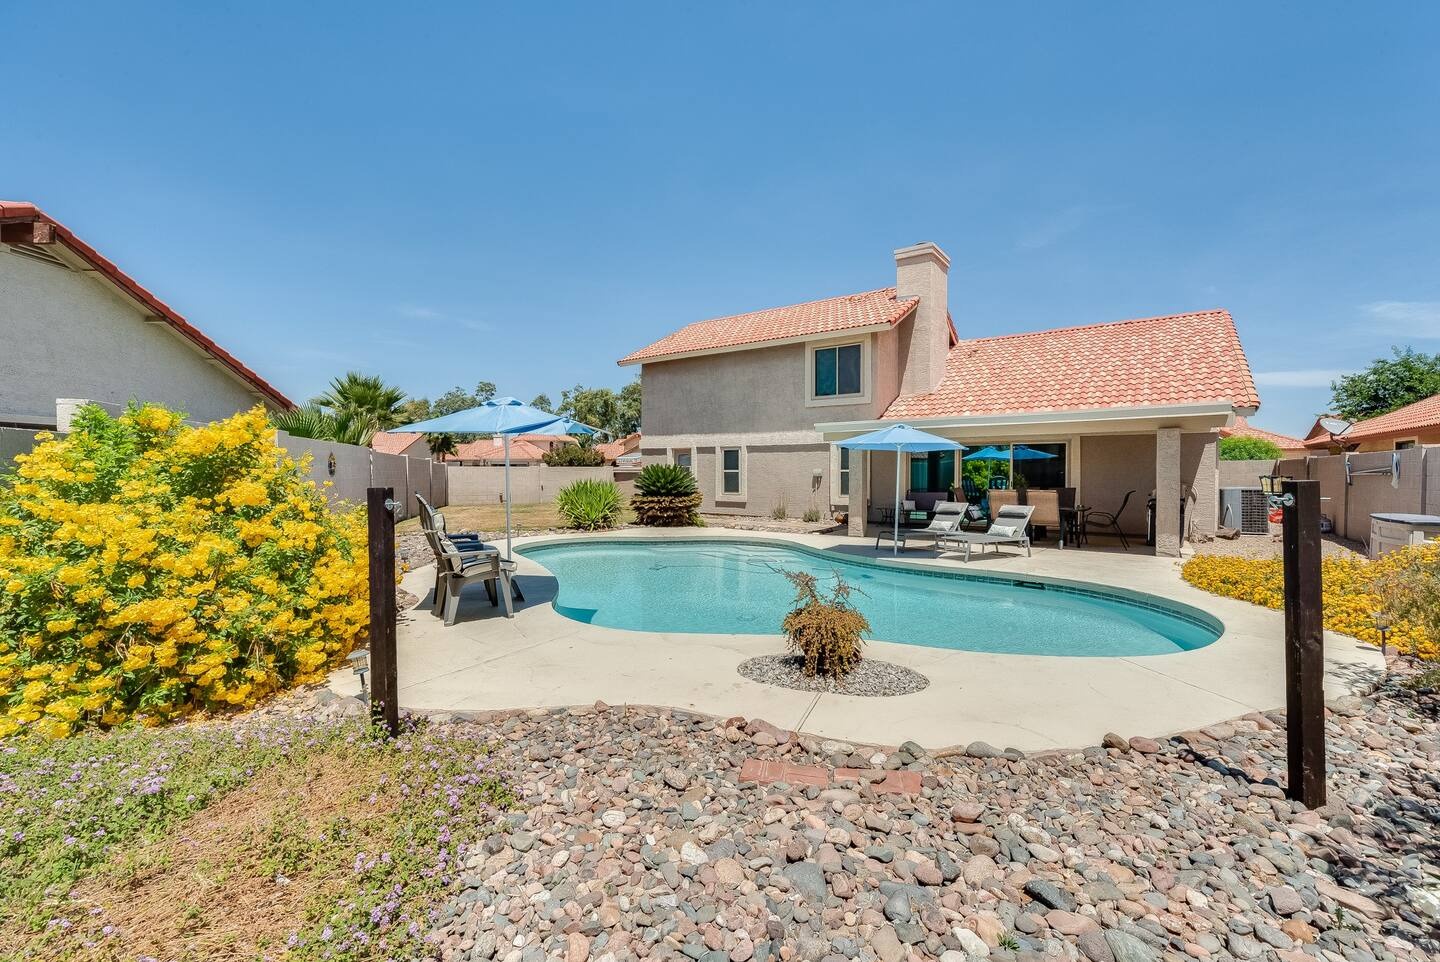 Glendale Vacation Rentals, Cahill Casa - Enjoy a refreshing dip in the private pool, soak up some poolside rays with the home’s lounge chairs, or open up the two stabilized poolside umbrellas for added shade